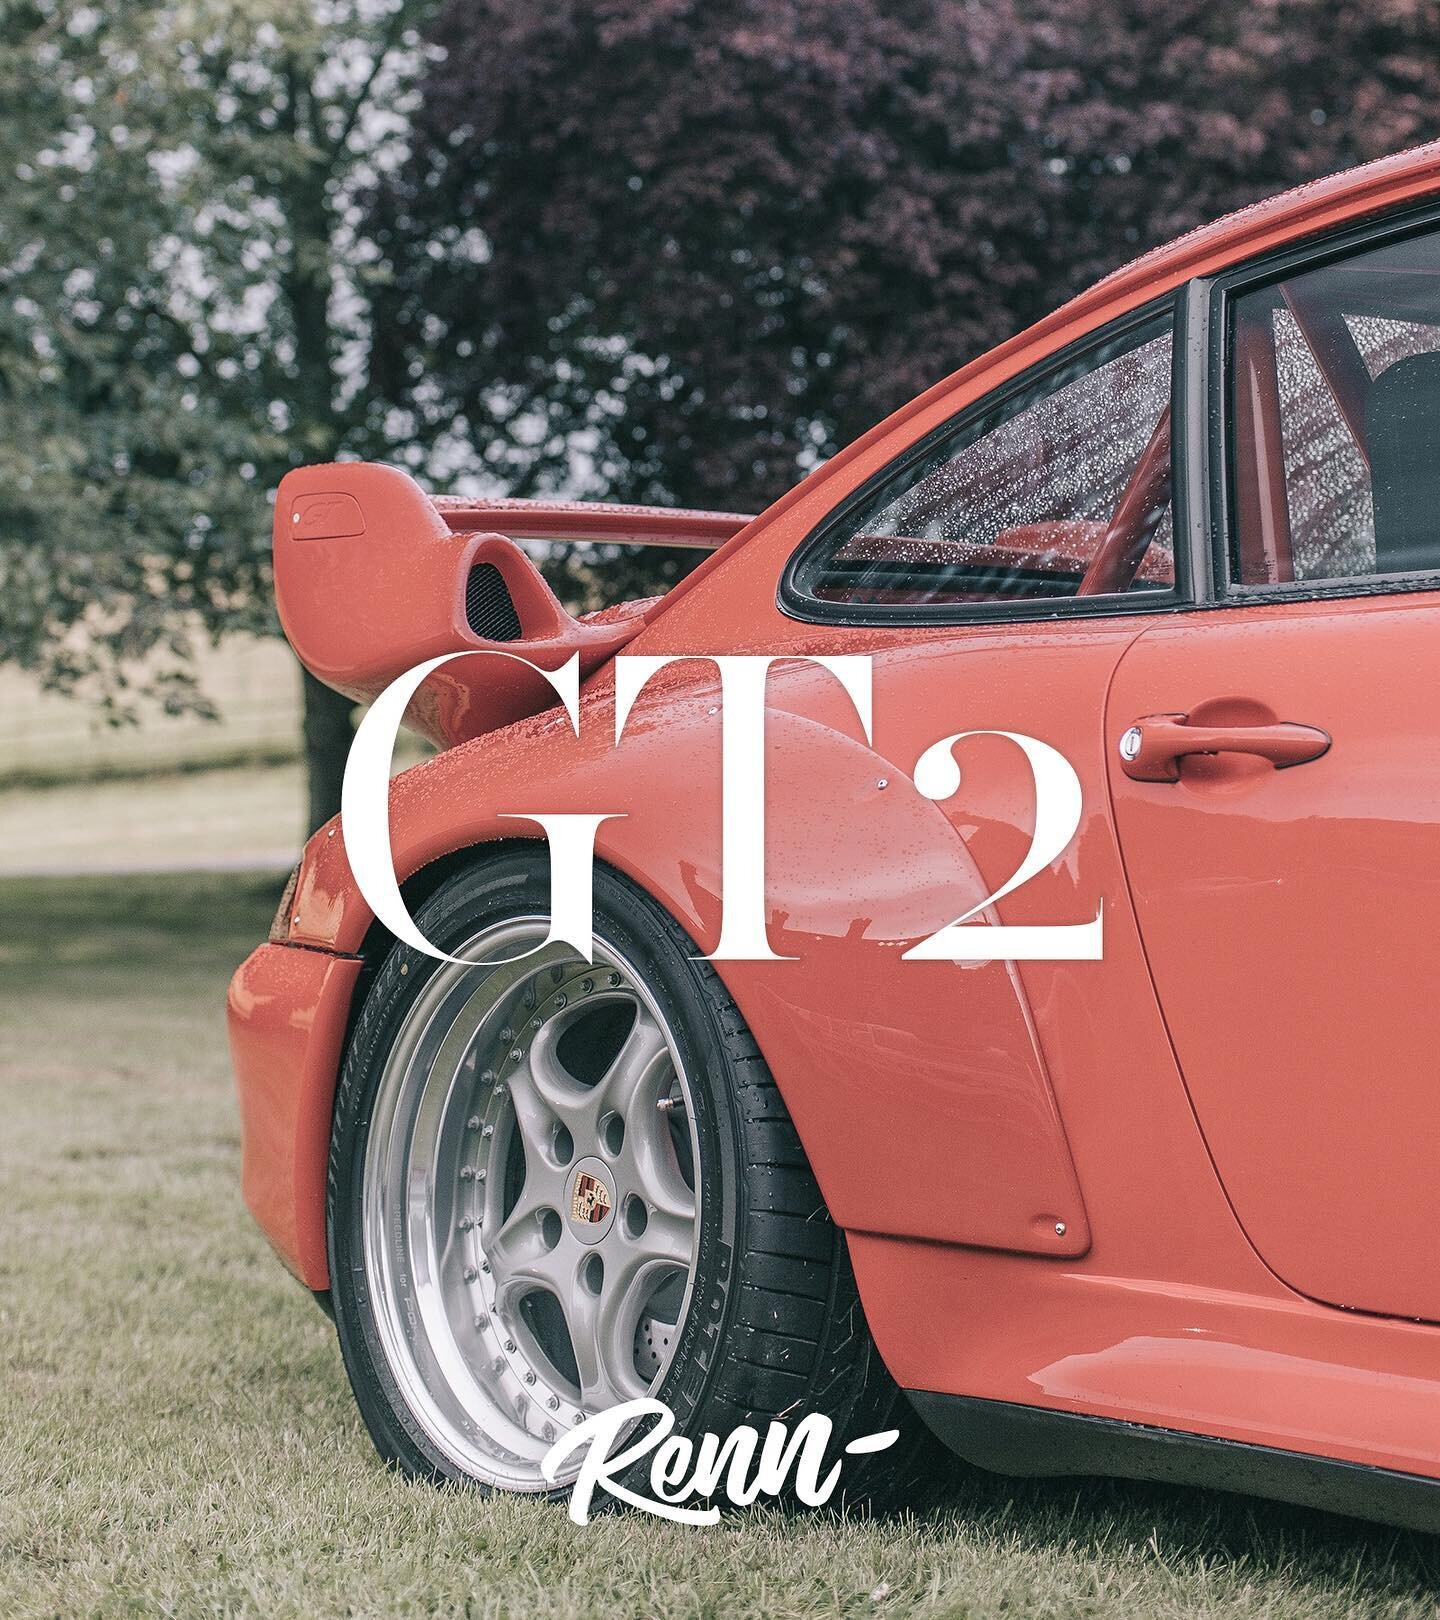 &bull;
Car: Porsche 993 GT
Photographer: @ingmarbtker
&bull;
TICKETS FOR 2020 EVENT NOW AVAILABLE!
01 NOVEMBER 2020
DEDICATED GUEST PORSCHE PARKING.
www.rennsportcollective.com
&bull;
New @YouTube Channel now live
Search &lsquo;Rennsport Collective&r